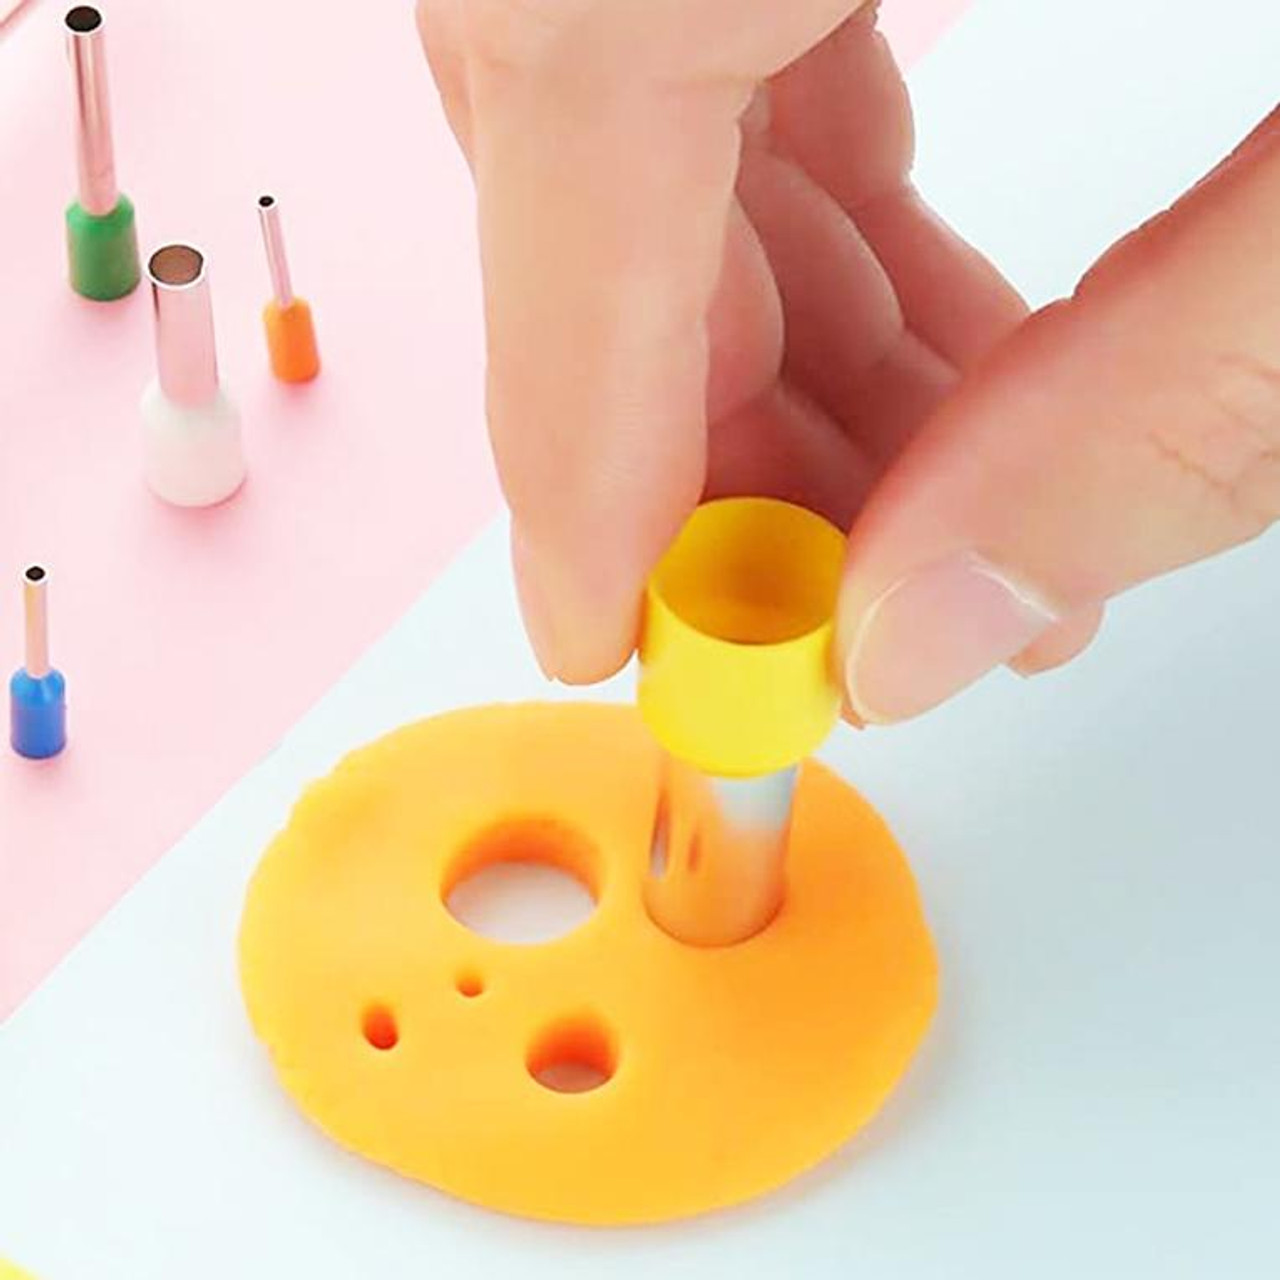 22050361 61pcs Polymer Clay Cutters Plastic Clay Modeling Tools Kit Round Circle Shape Cutters Mold with Acrylic Clay Roller for Shaping, Sculpting